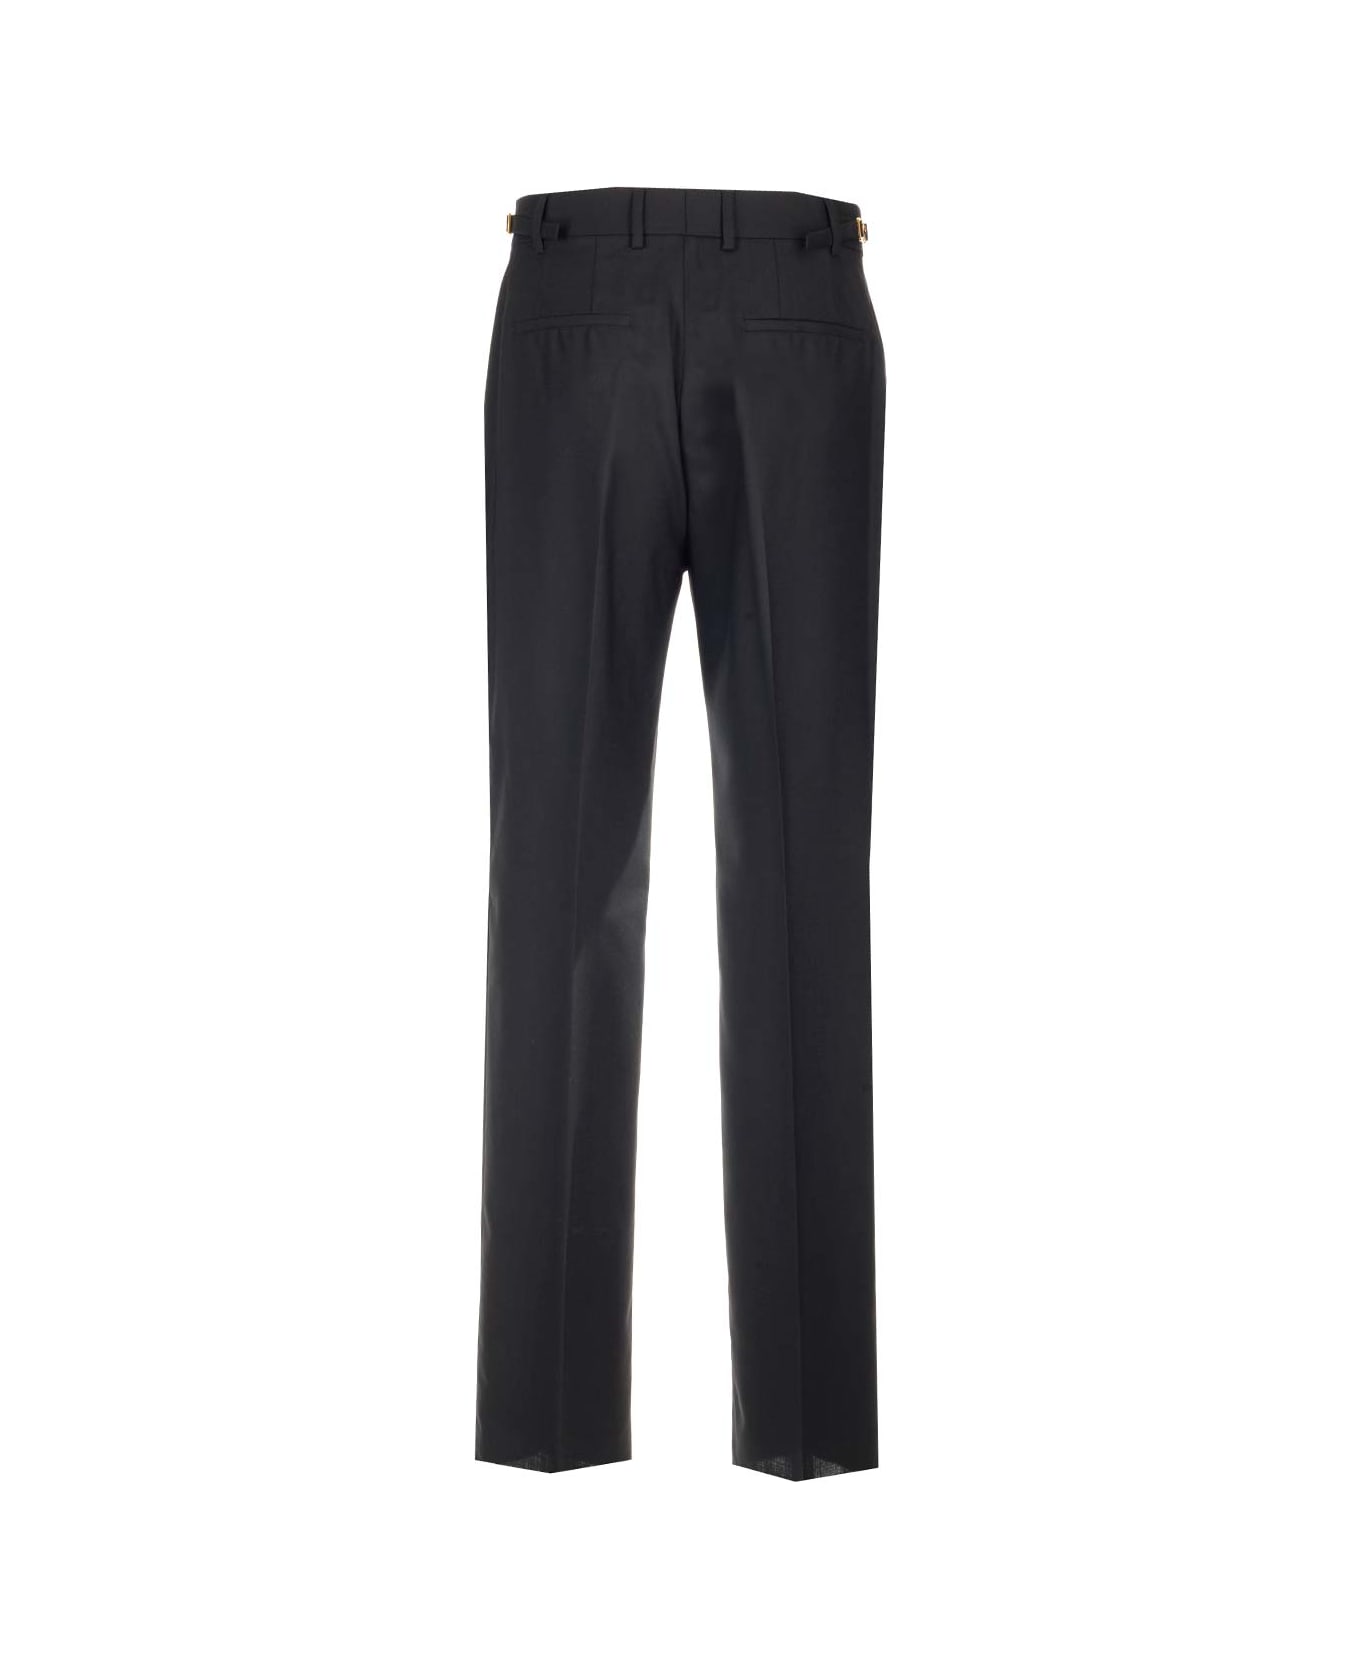 Versace Tailored Wool Trousers - Black ボトムス